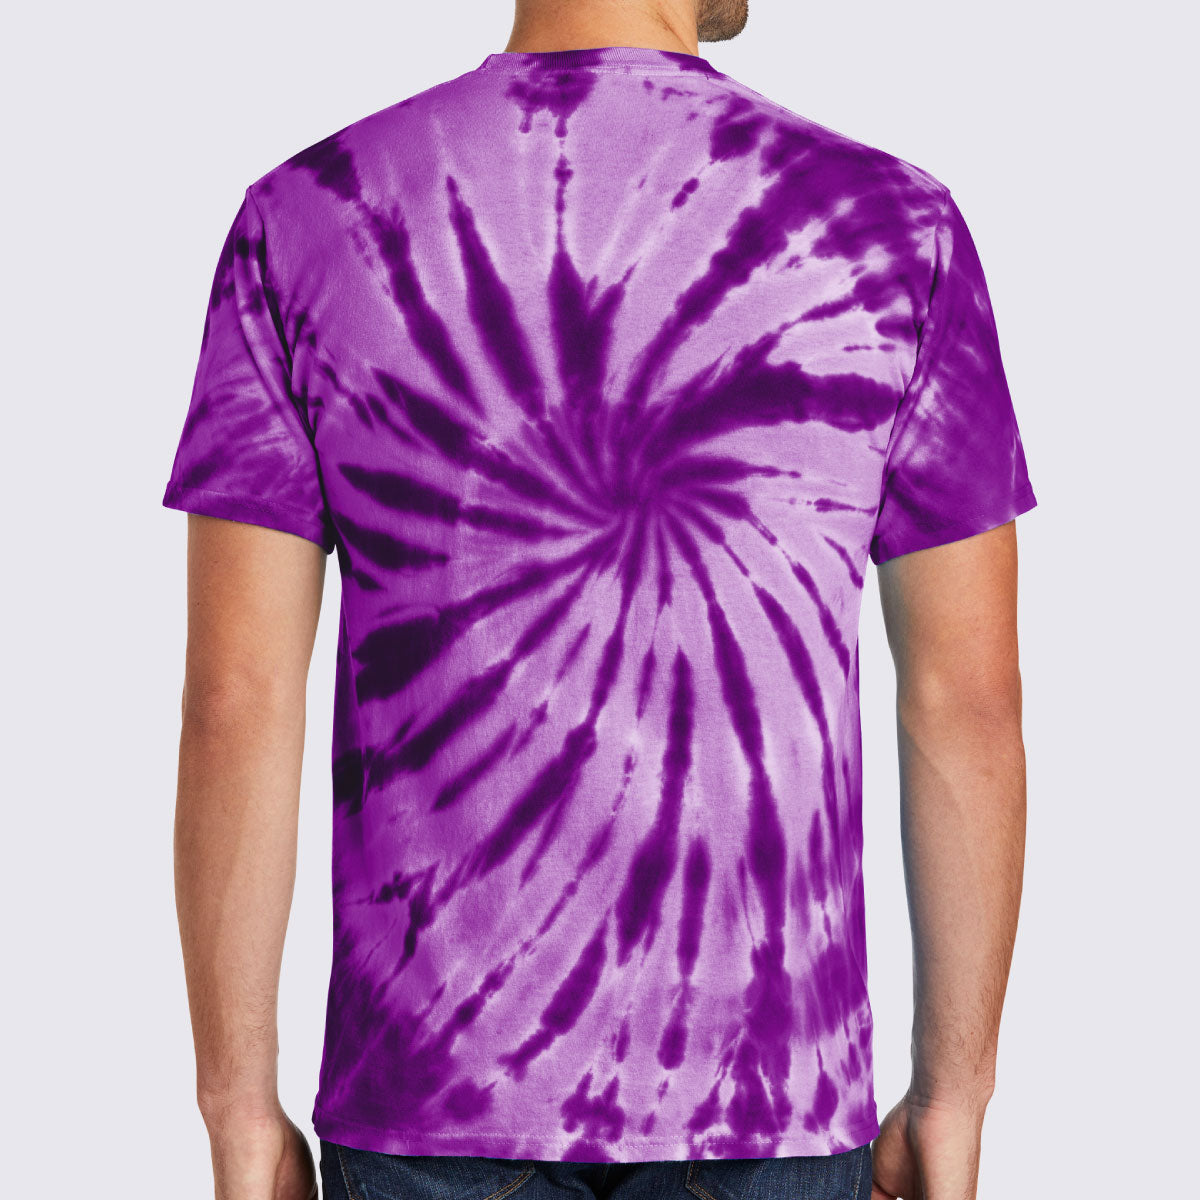 How To Tie Dye A Purple And White Spiral Shirt 